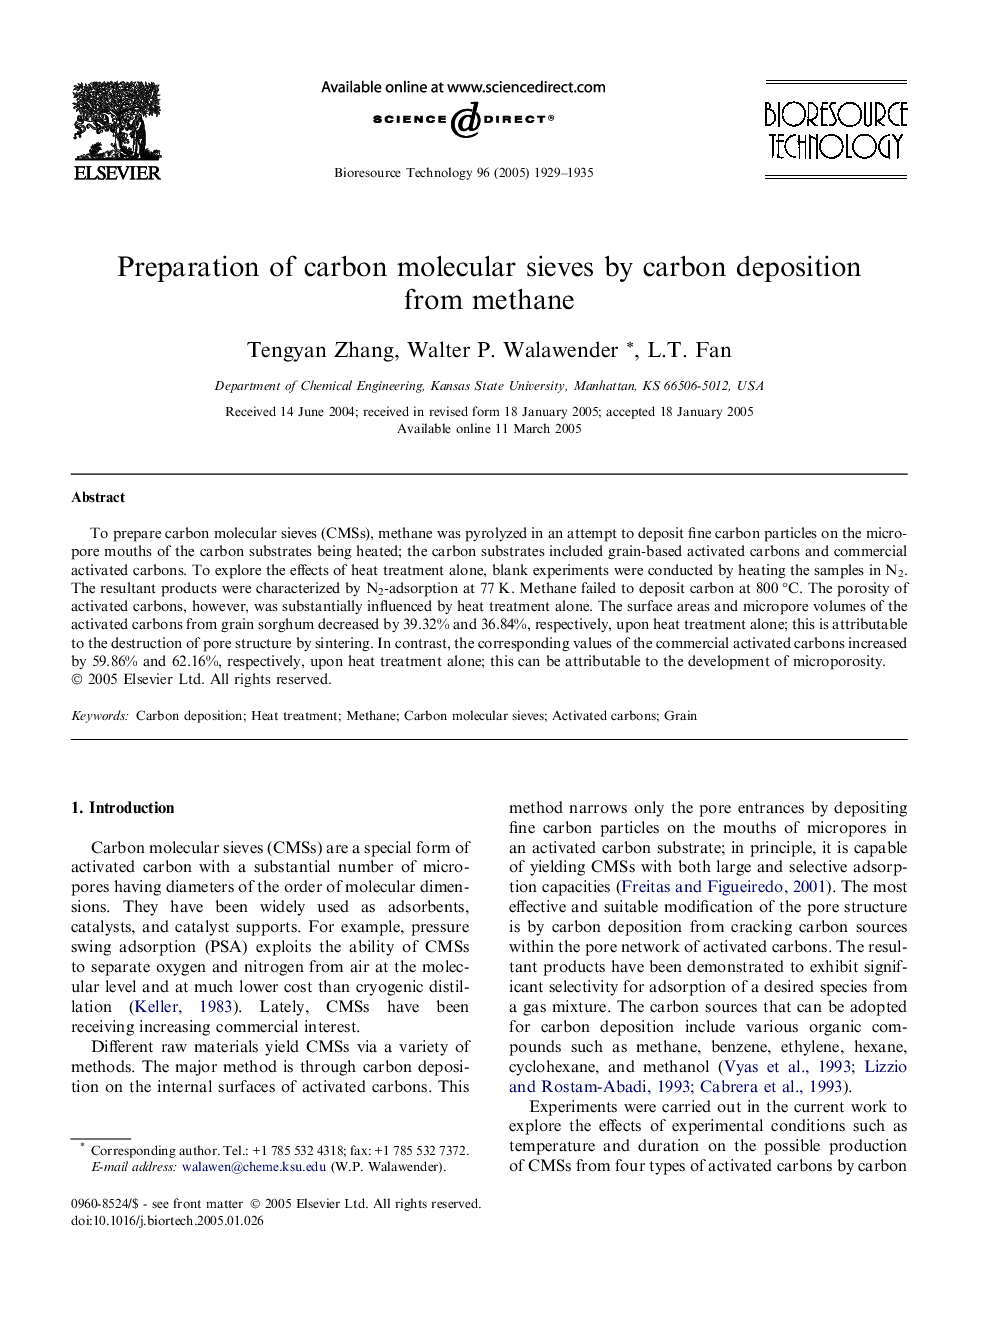 Preparation of carbon molecular sieves by carbon deposition from methane